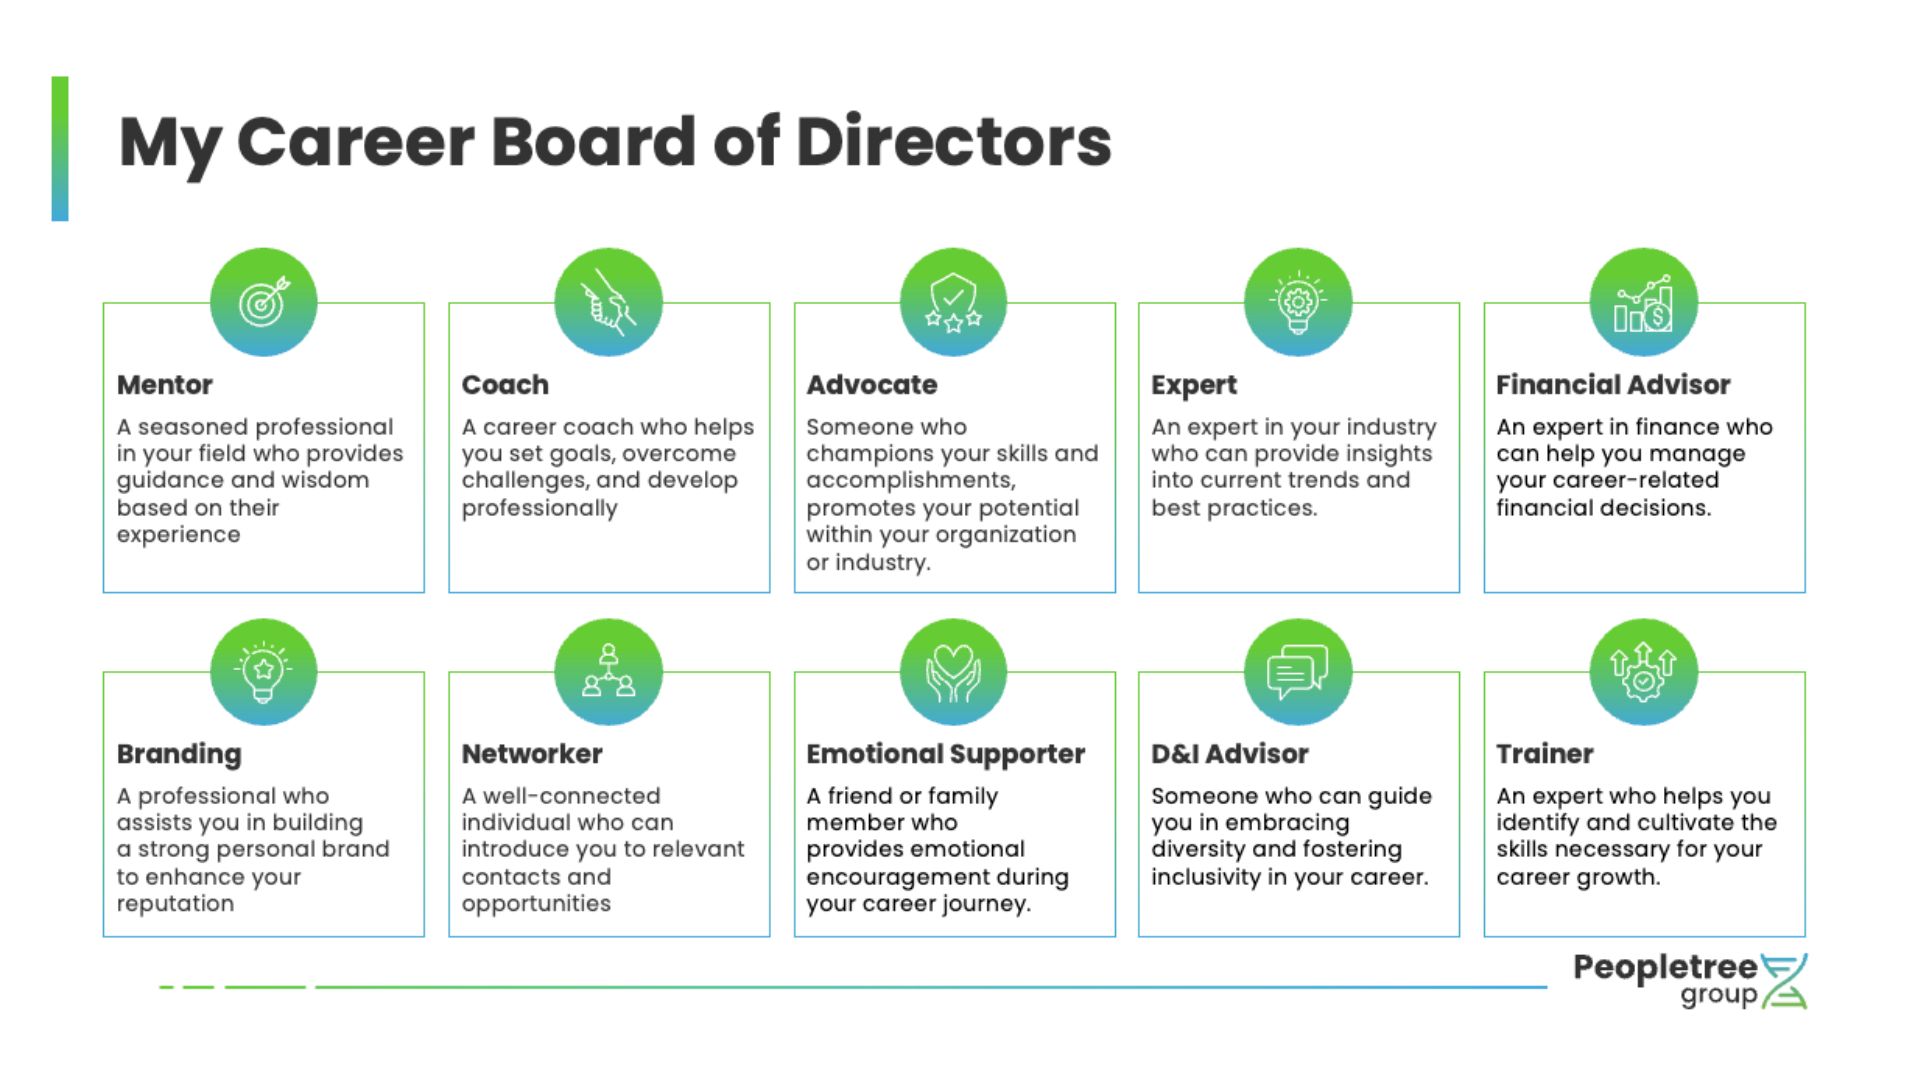 Diagram illustrating a Career Board of Directors with roles such as Mentor, Coach, Advocate, Expert, Financial Advisor, Branding, Networker, Emotional Supporter, D&I Advisor, and Trainer.